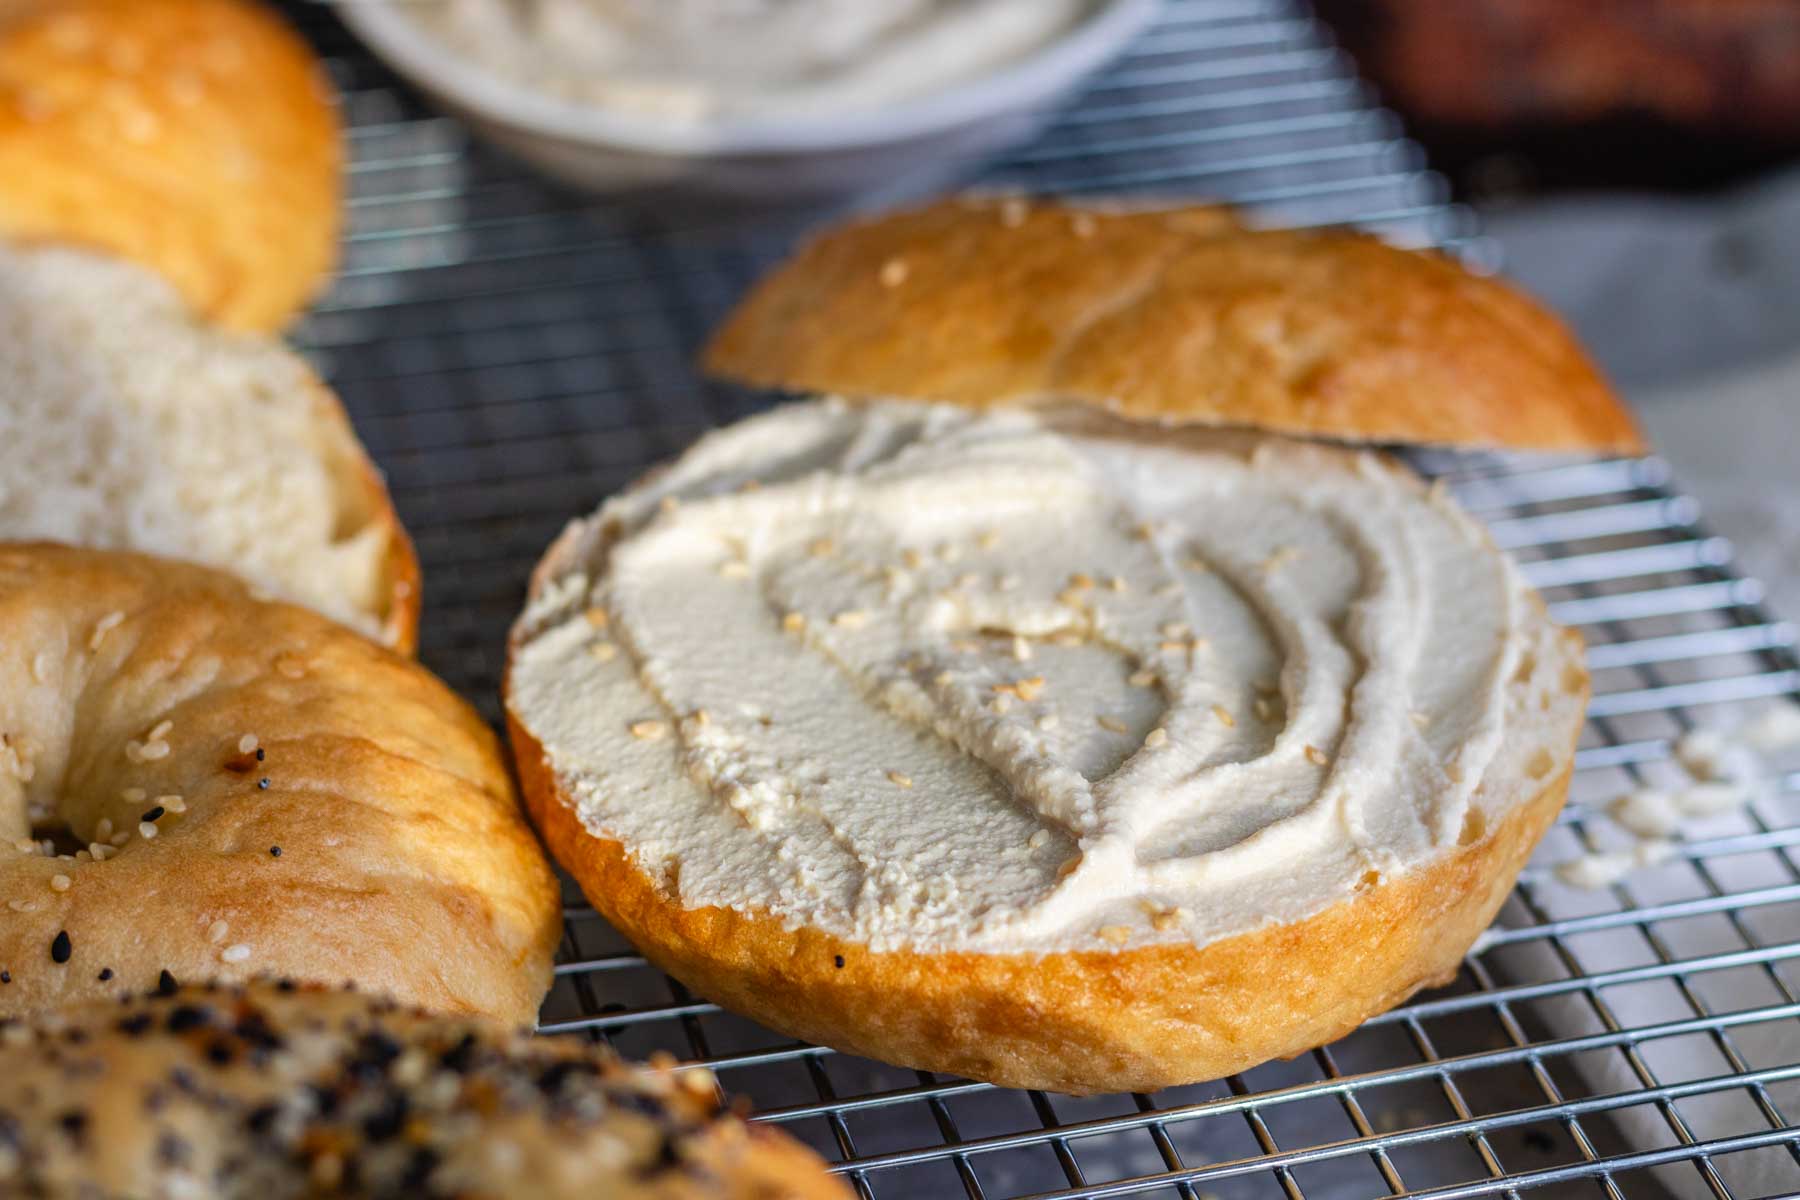 Close up of vegan cream cheese on a bagel.